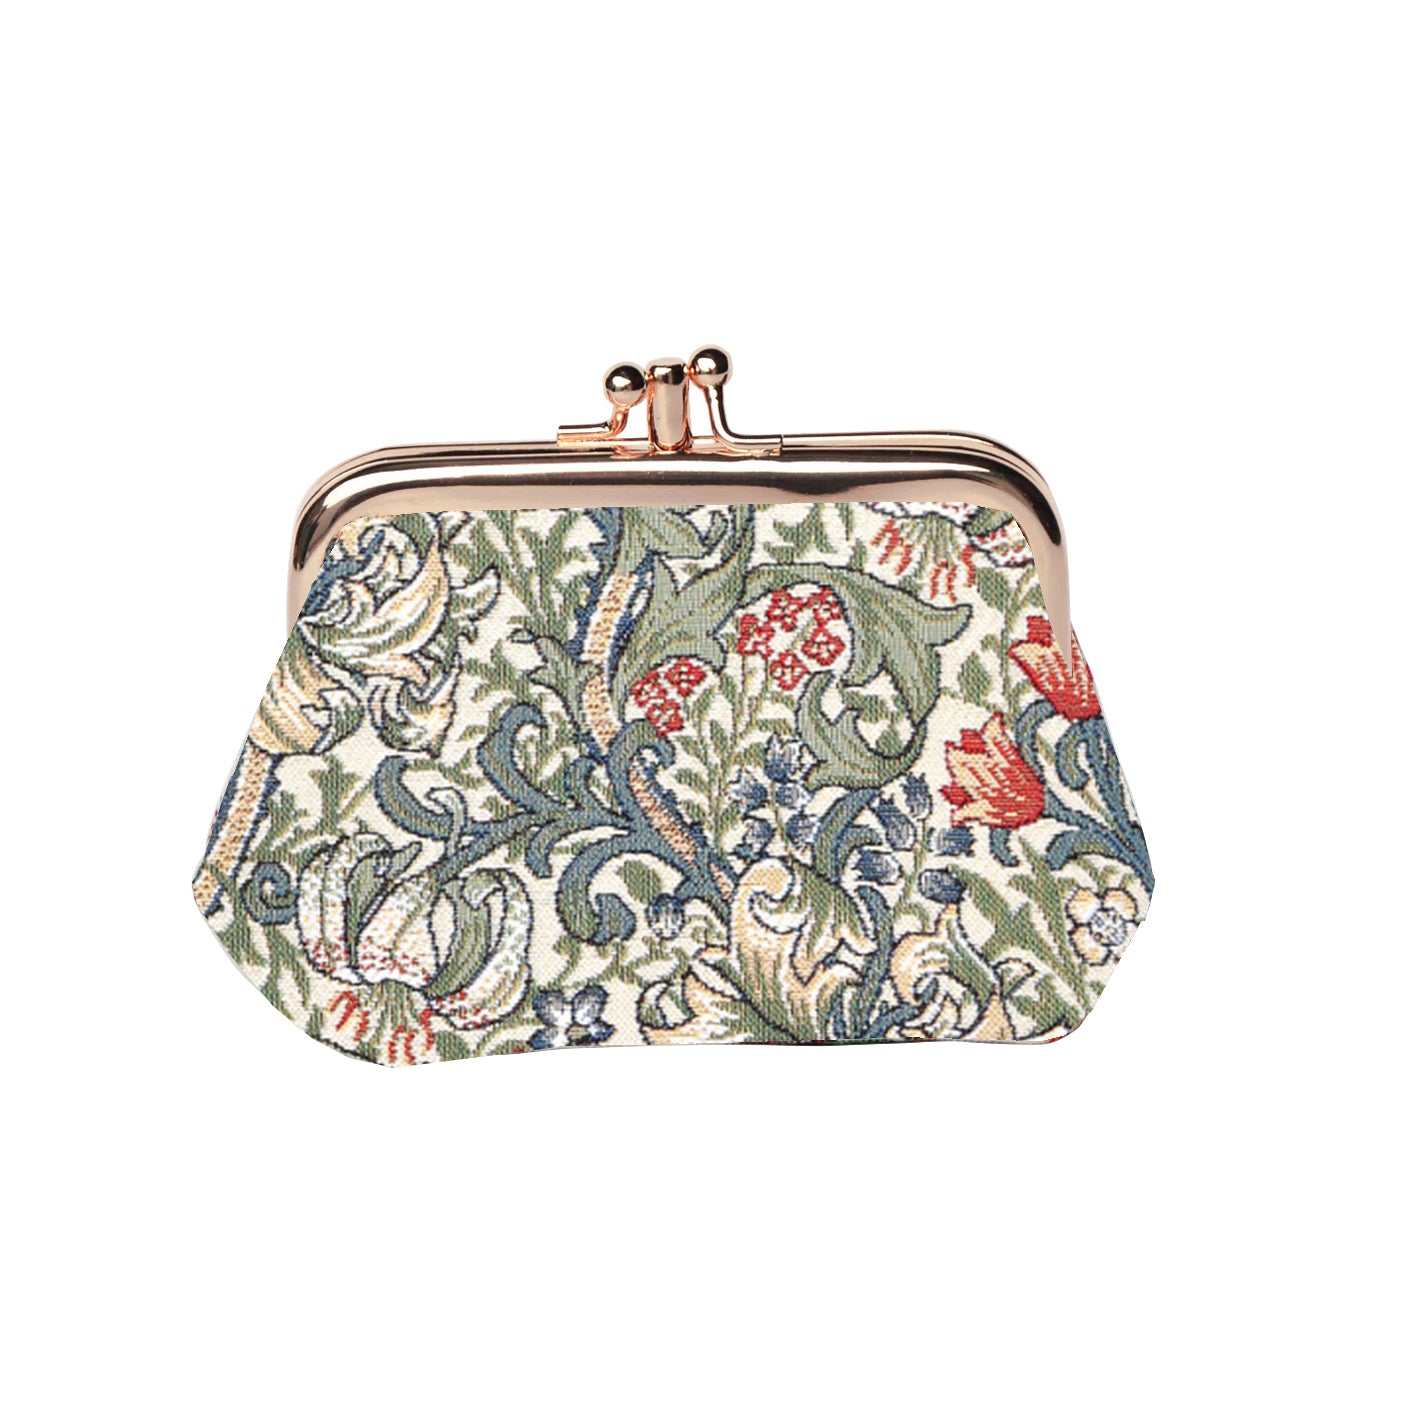 FRMP-GLILY | WILLIAM MORRIS GOLDEN LILY COIN CLASP FRAME PURSE WALLET - www.signareusa.com